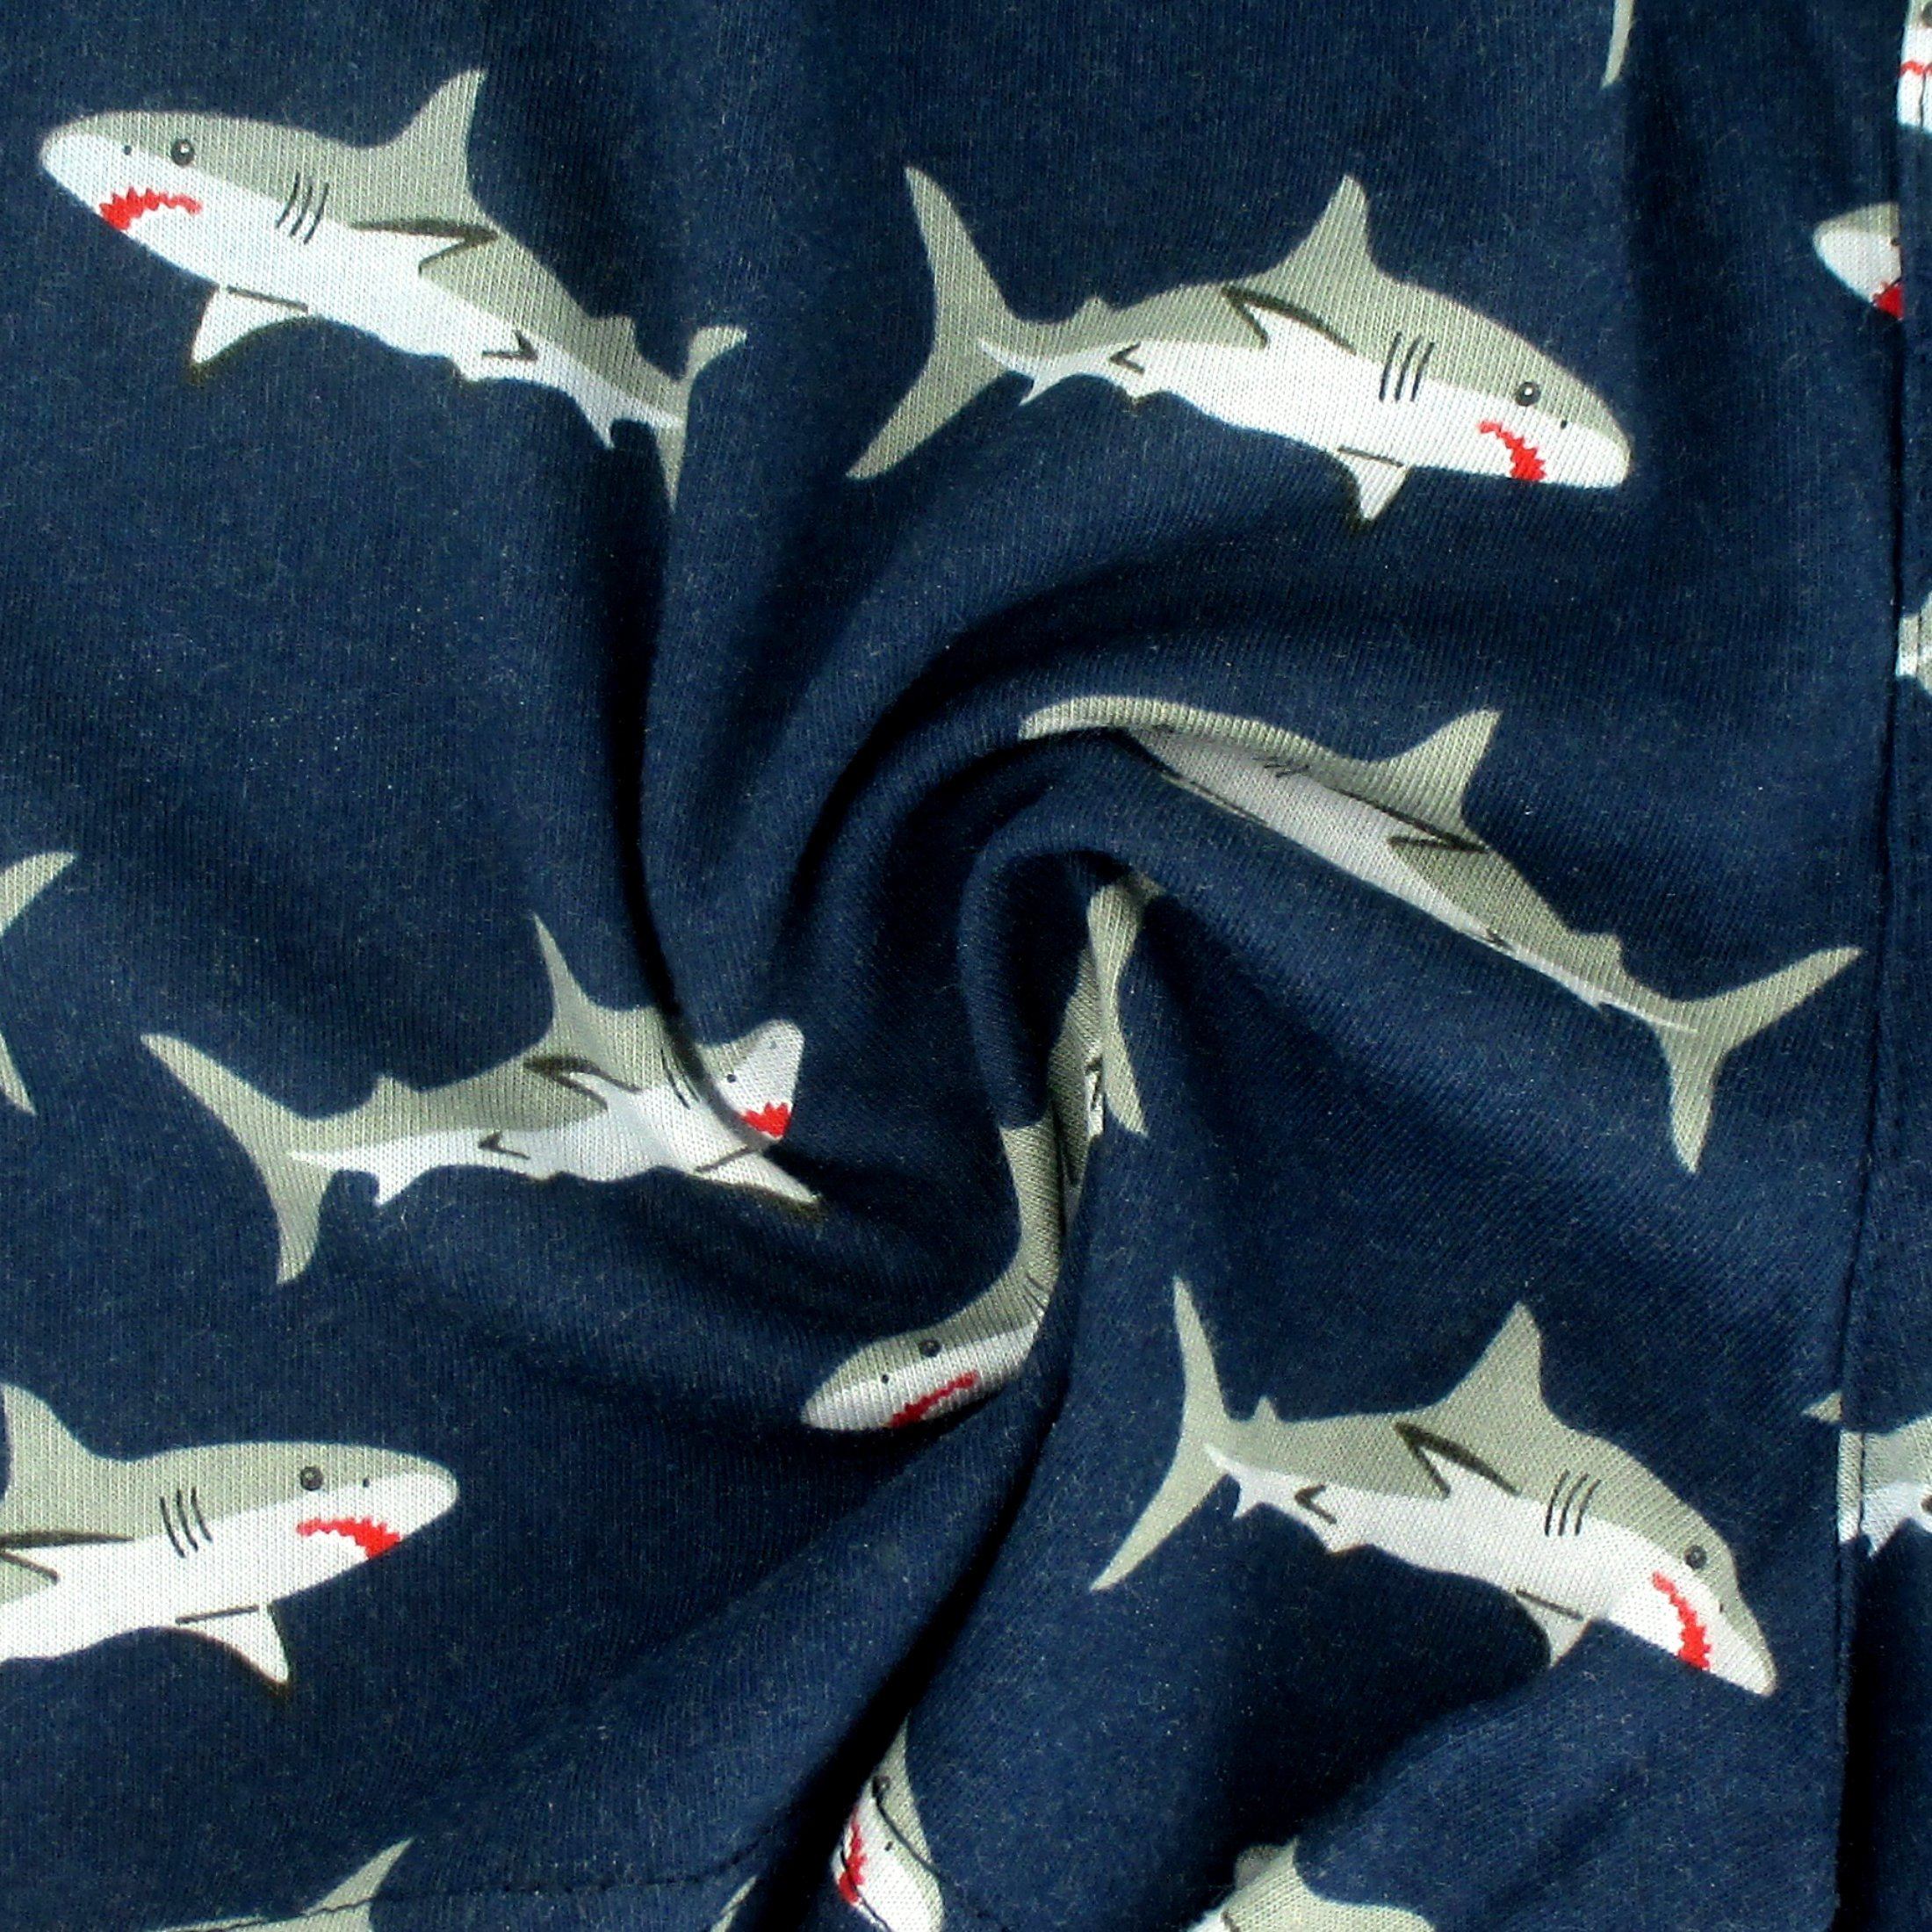 Super Soft and Comfy Cotton Jersey Stretch Knit Boxer Shorts Underwear For Men with Sharks All Over